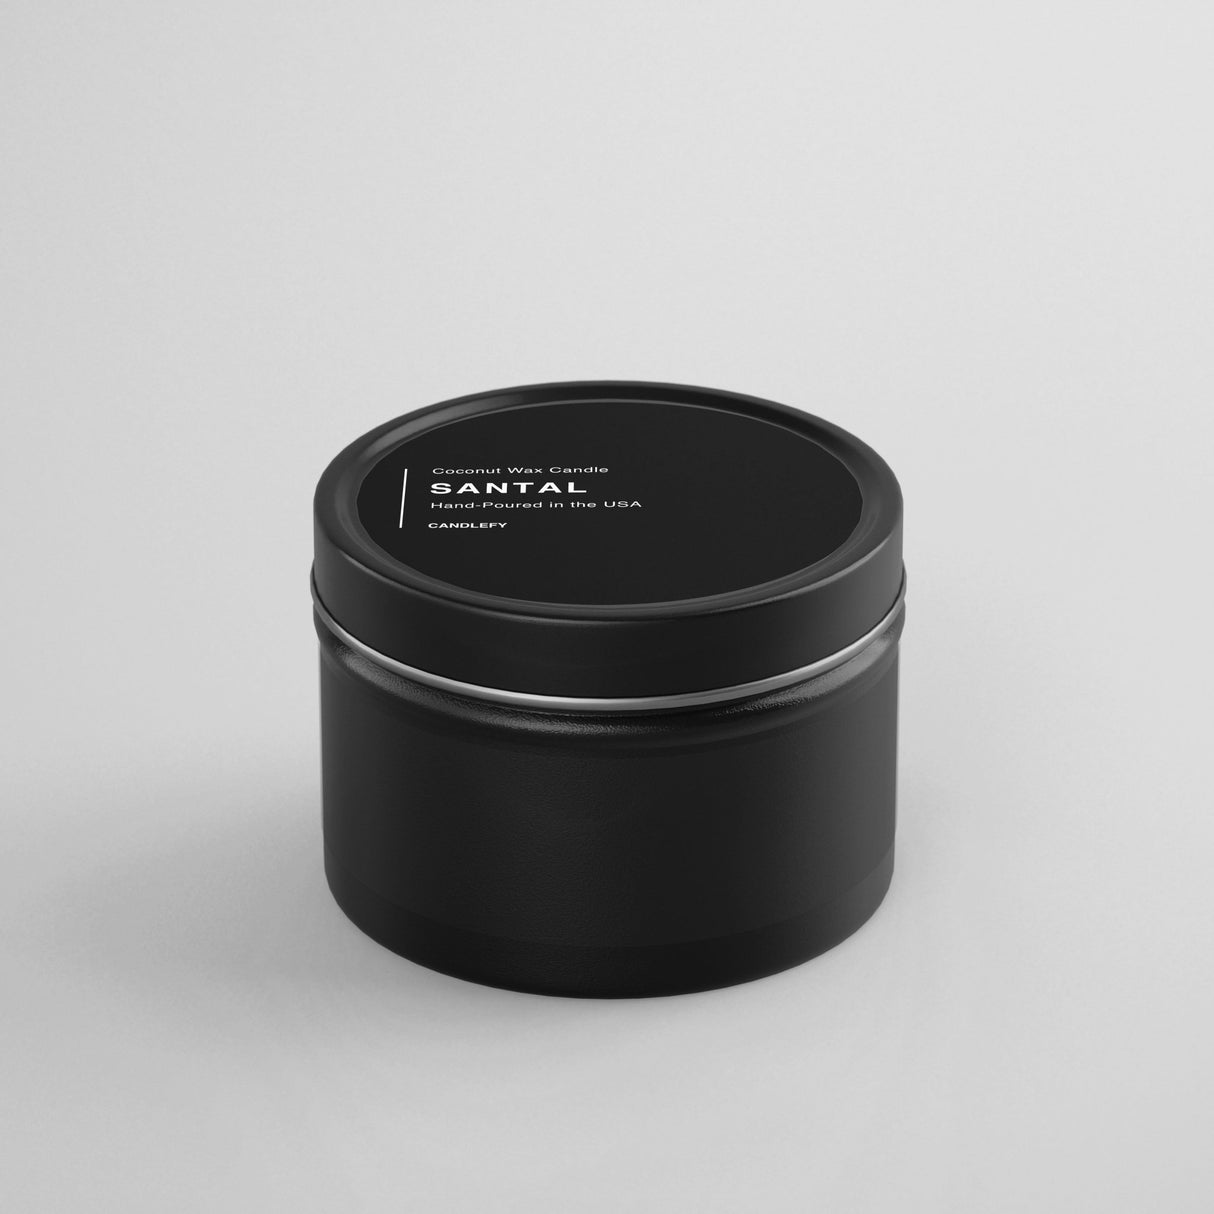 Santal Natural Wax Scented Candle in Black Travel Tin - Candlefy